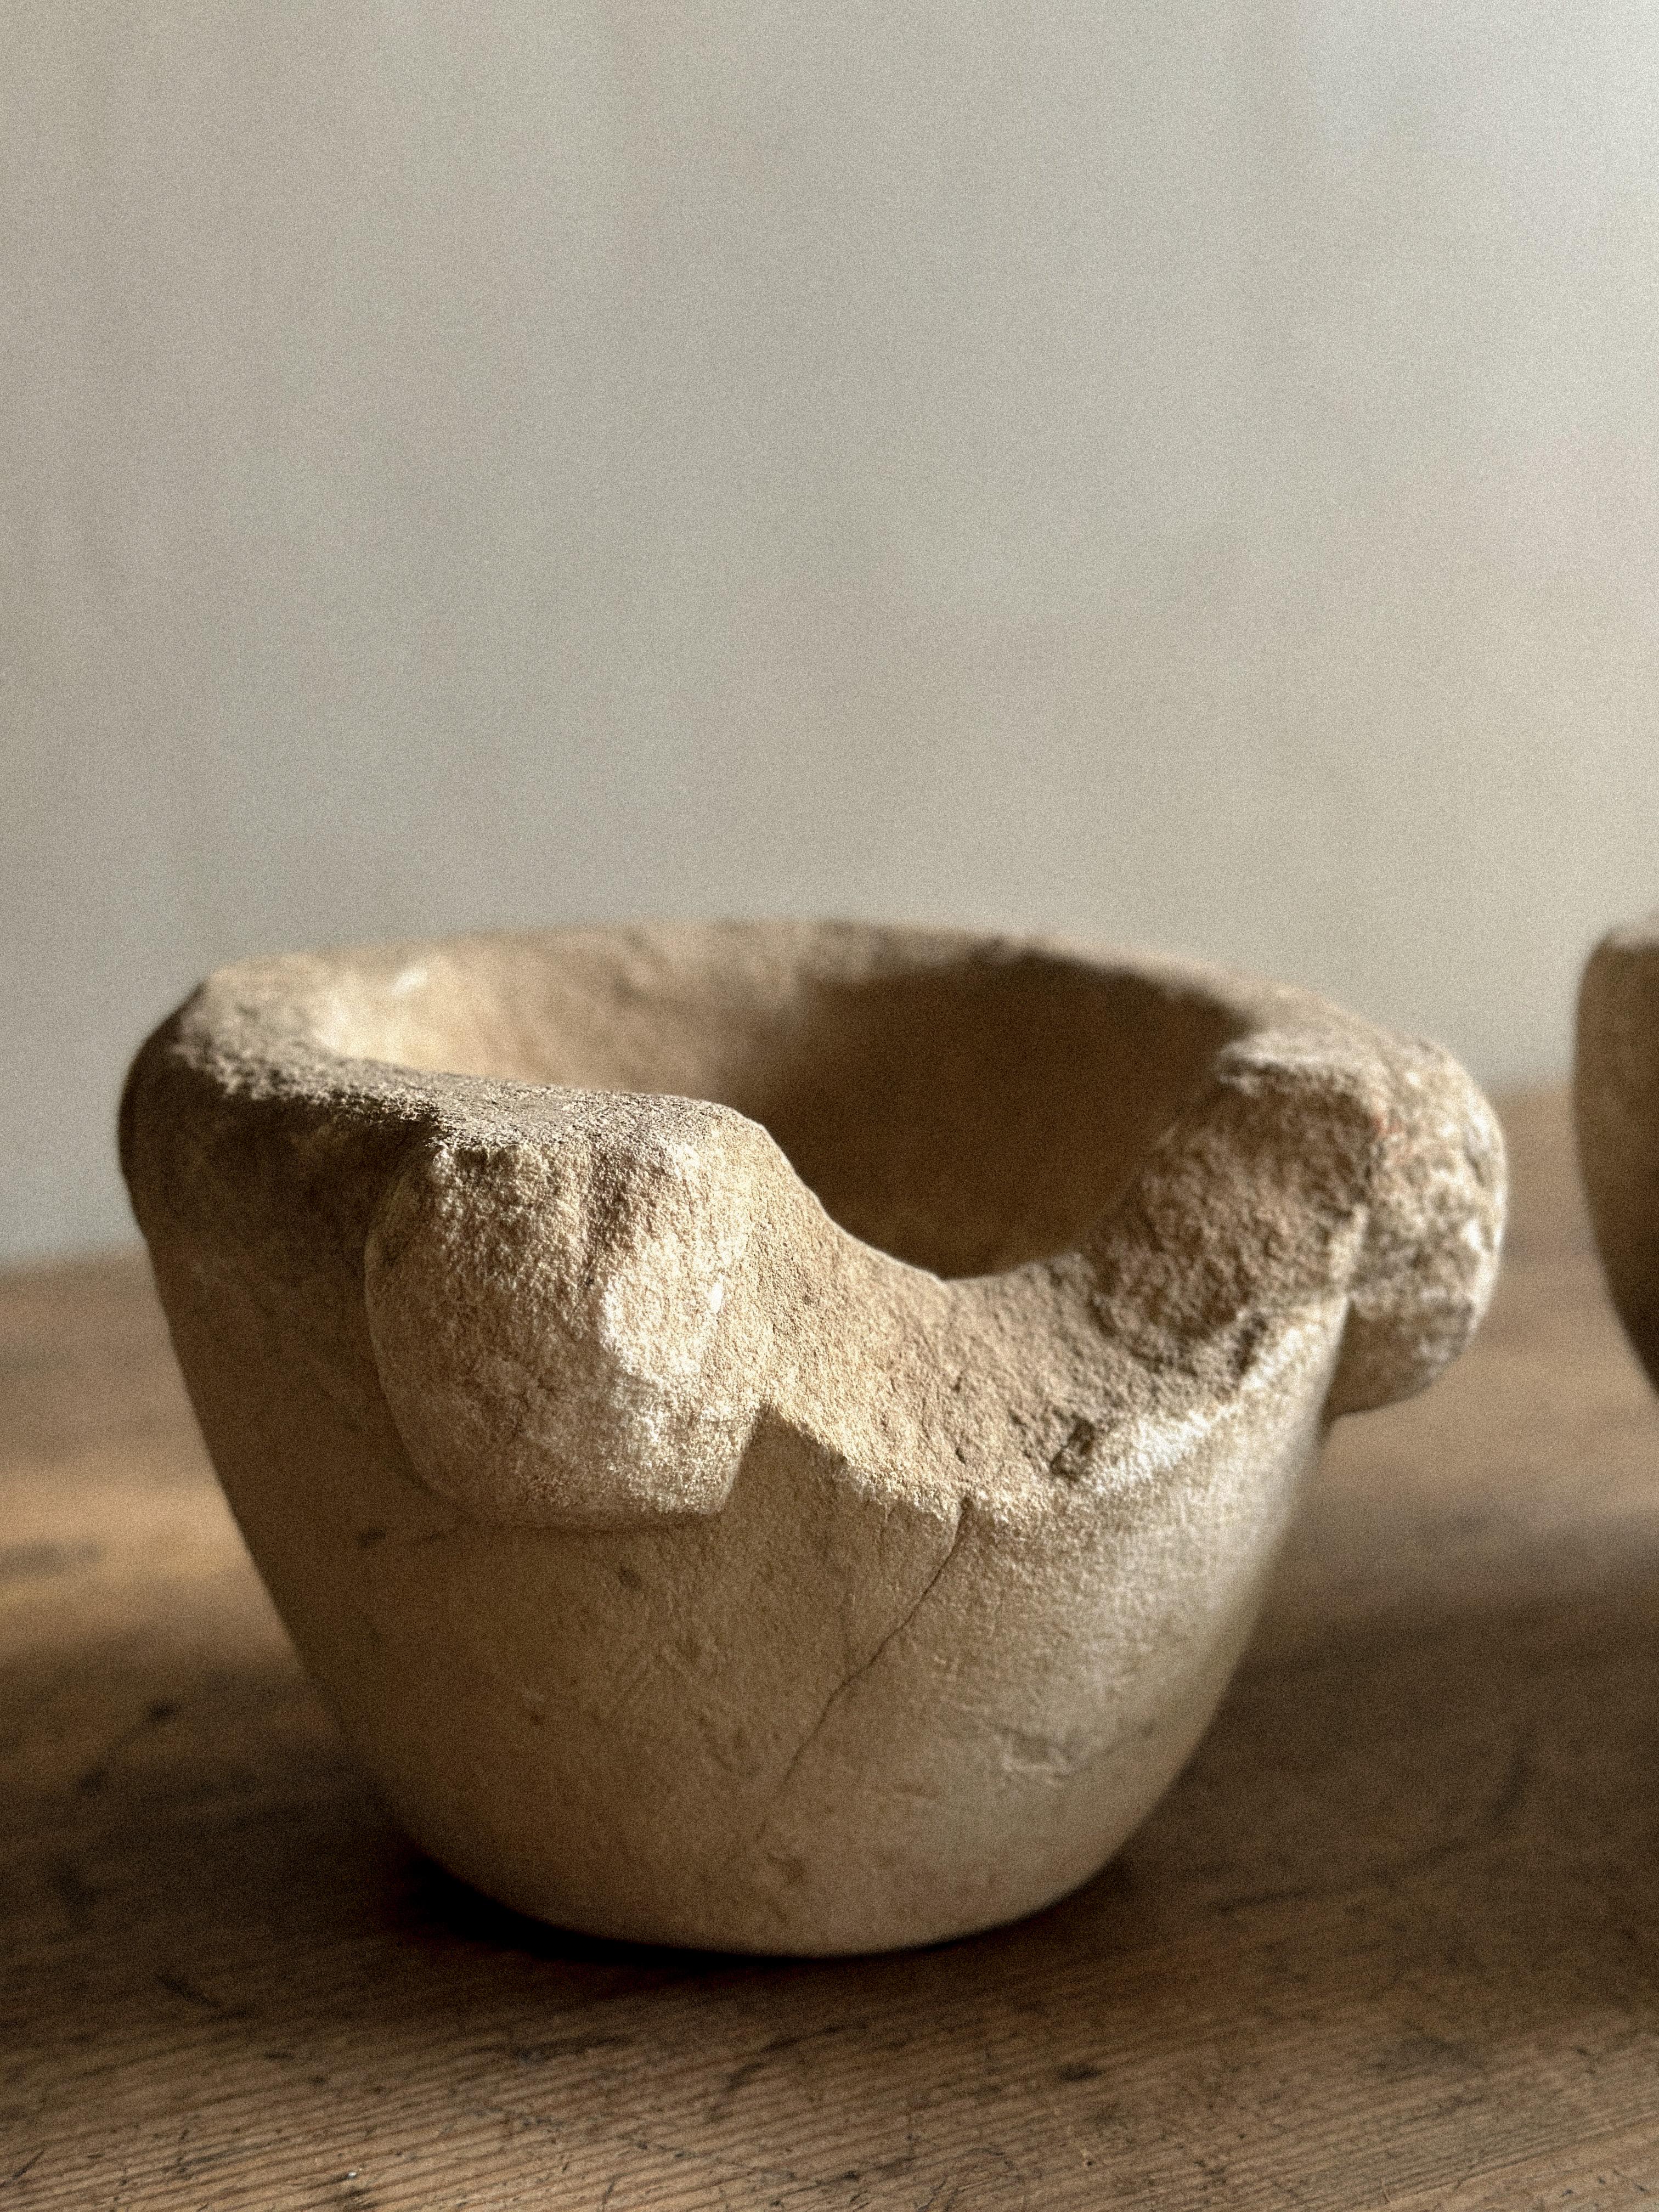 A Duo of Primitive Wabi Sabi Hand-Carved Stone Mortars, Spain, Early 1900s For Sale 5